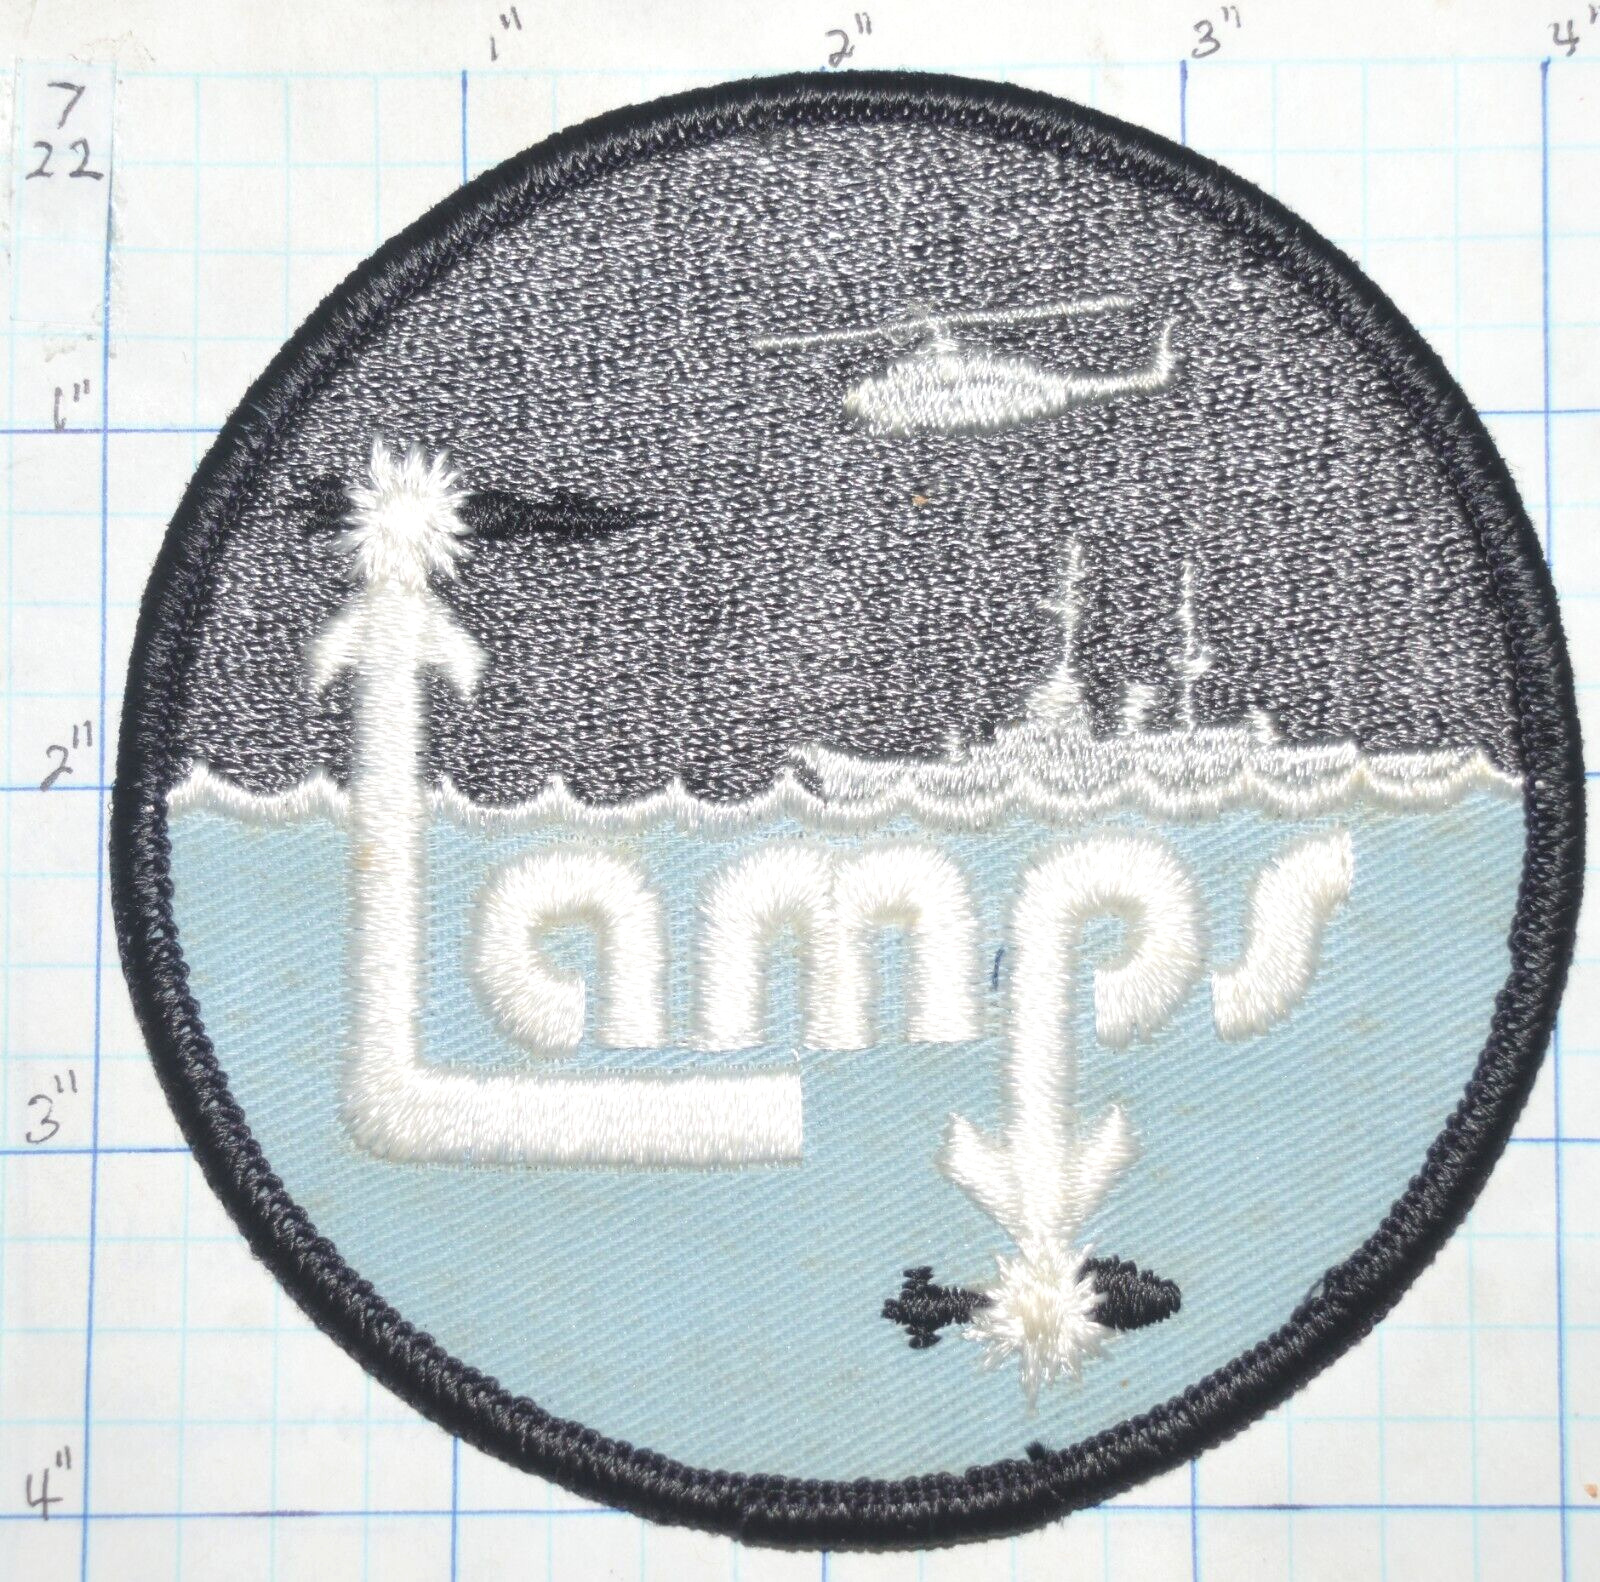 USN US NAVY LAMPS LIGHT AIRBOURNE MULTI-PURPOSE SYSTEM HELICOPTER AID PATCH